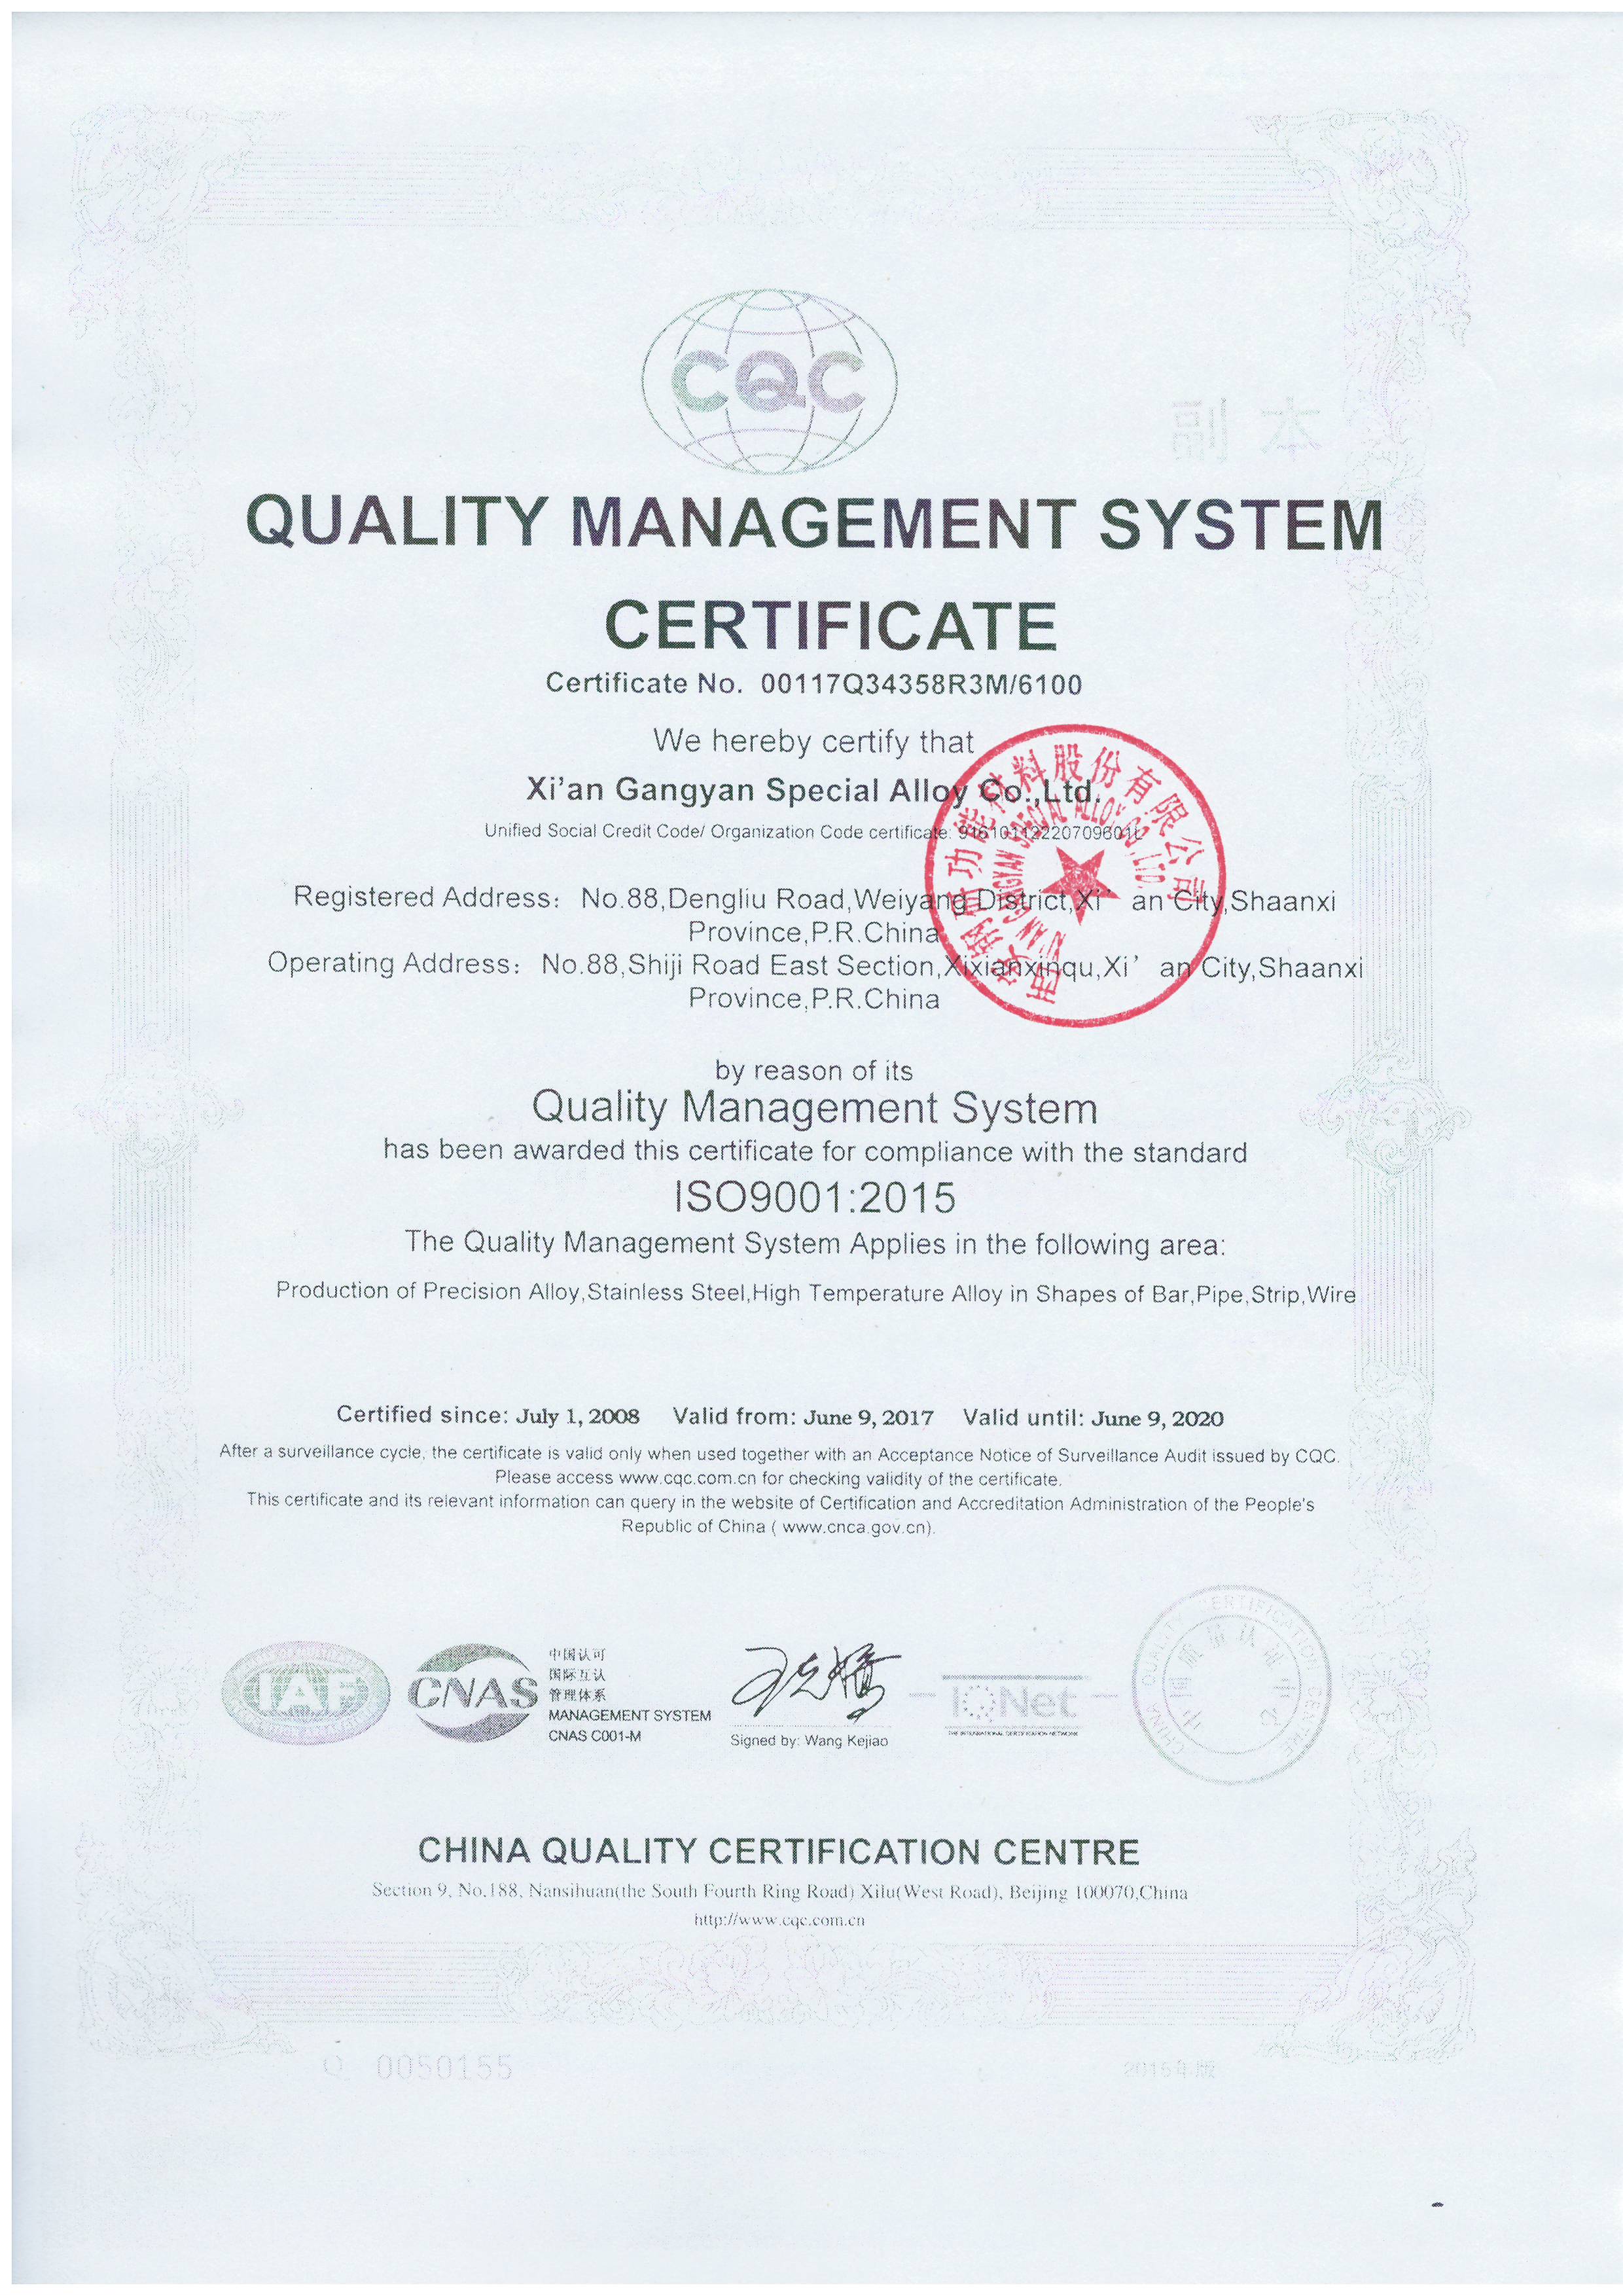 Quality Management System Certificate upgrade ISO9001:2015